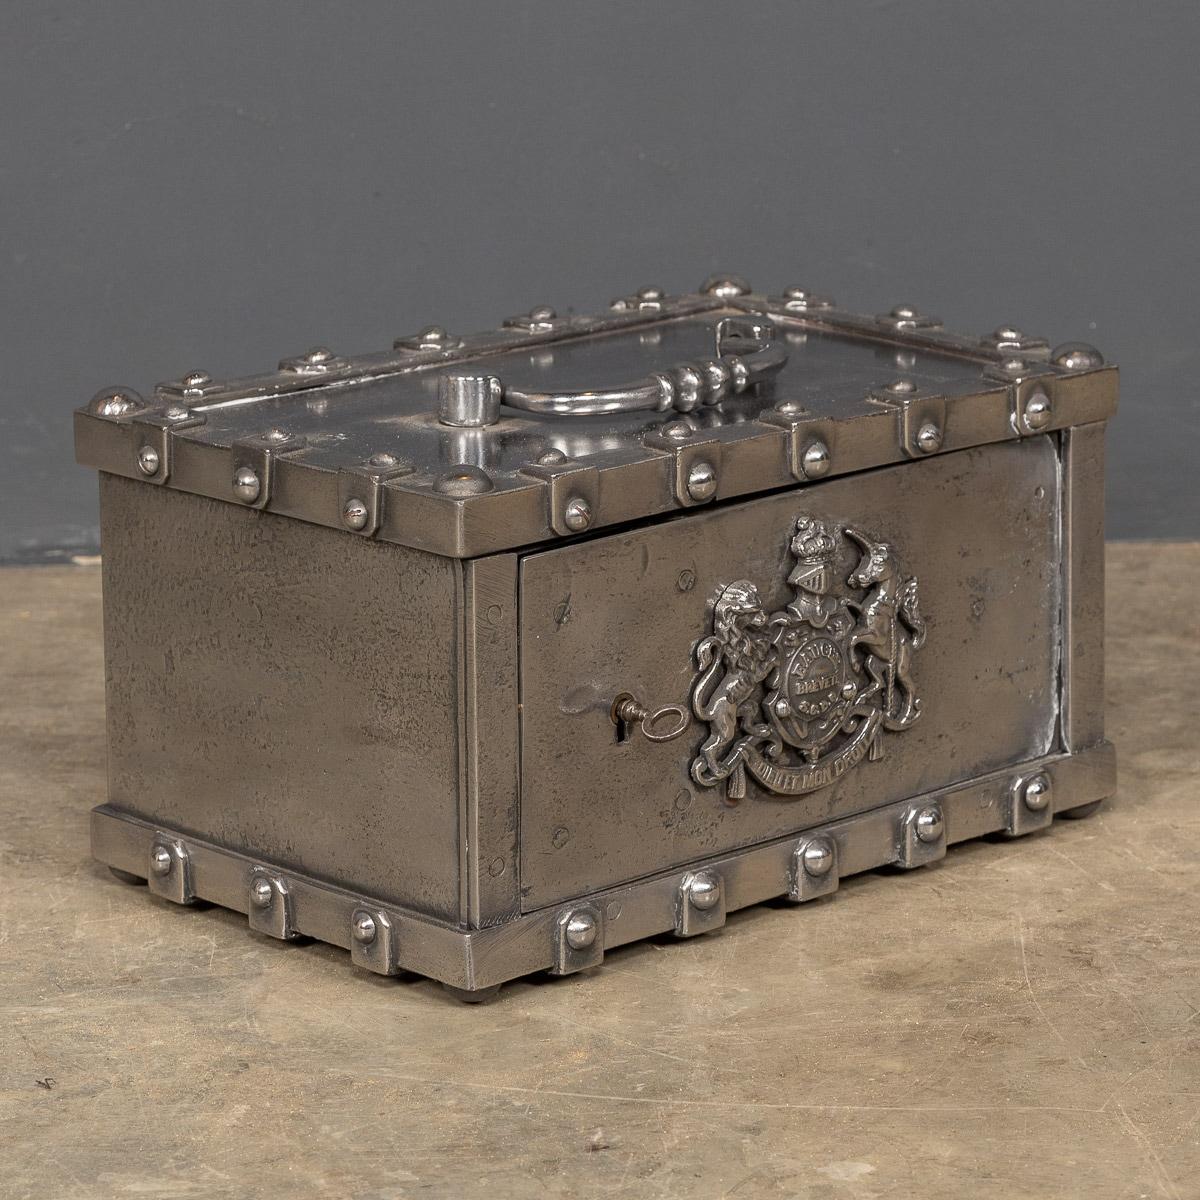 Antique mid-19th Century Victorian cast iron safe made by Bauche during the reign of Napoleon III. Primarily used for the transport of document or valuables this was one of the first fireproof safes available. This piece has its original key. It